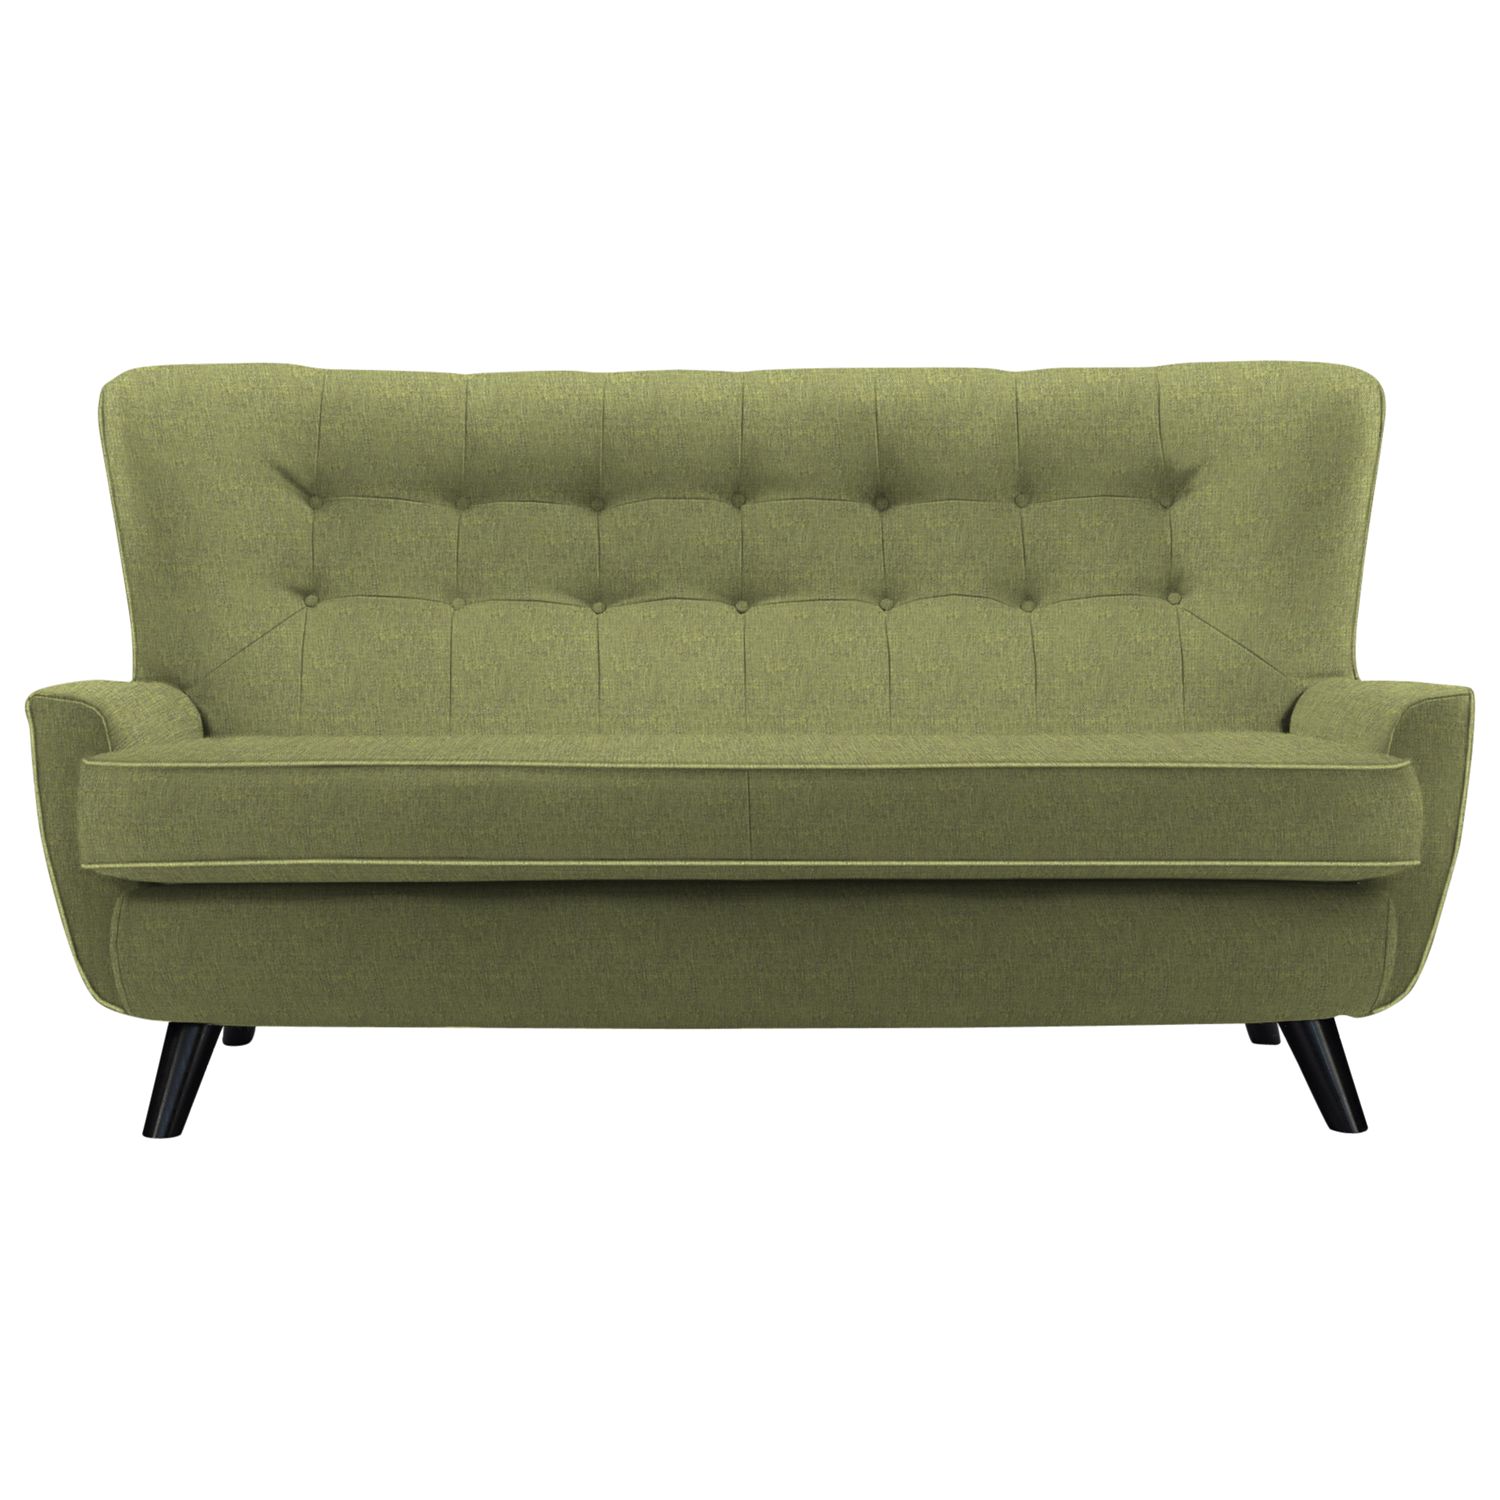 G Plan Vintage The Sixty One Large Sofa, Marl Green, width 185cm